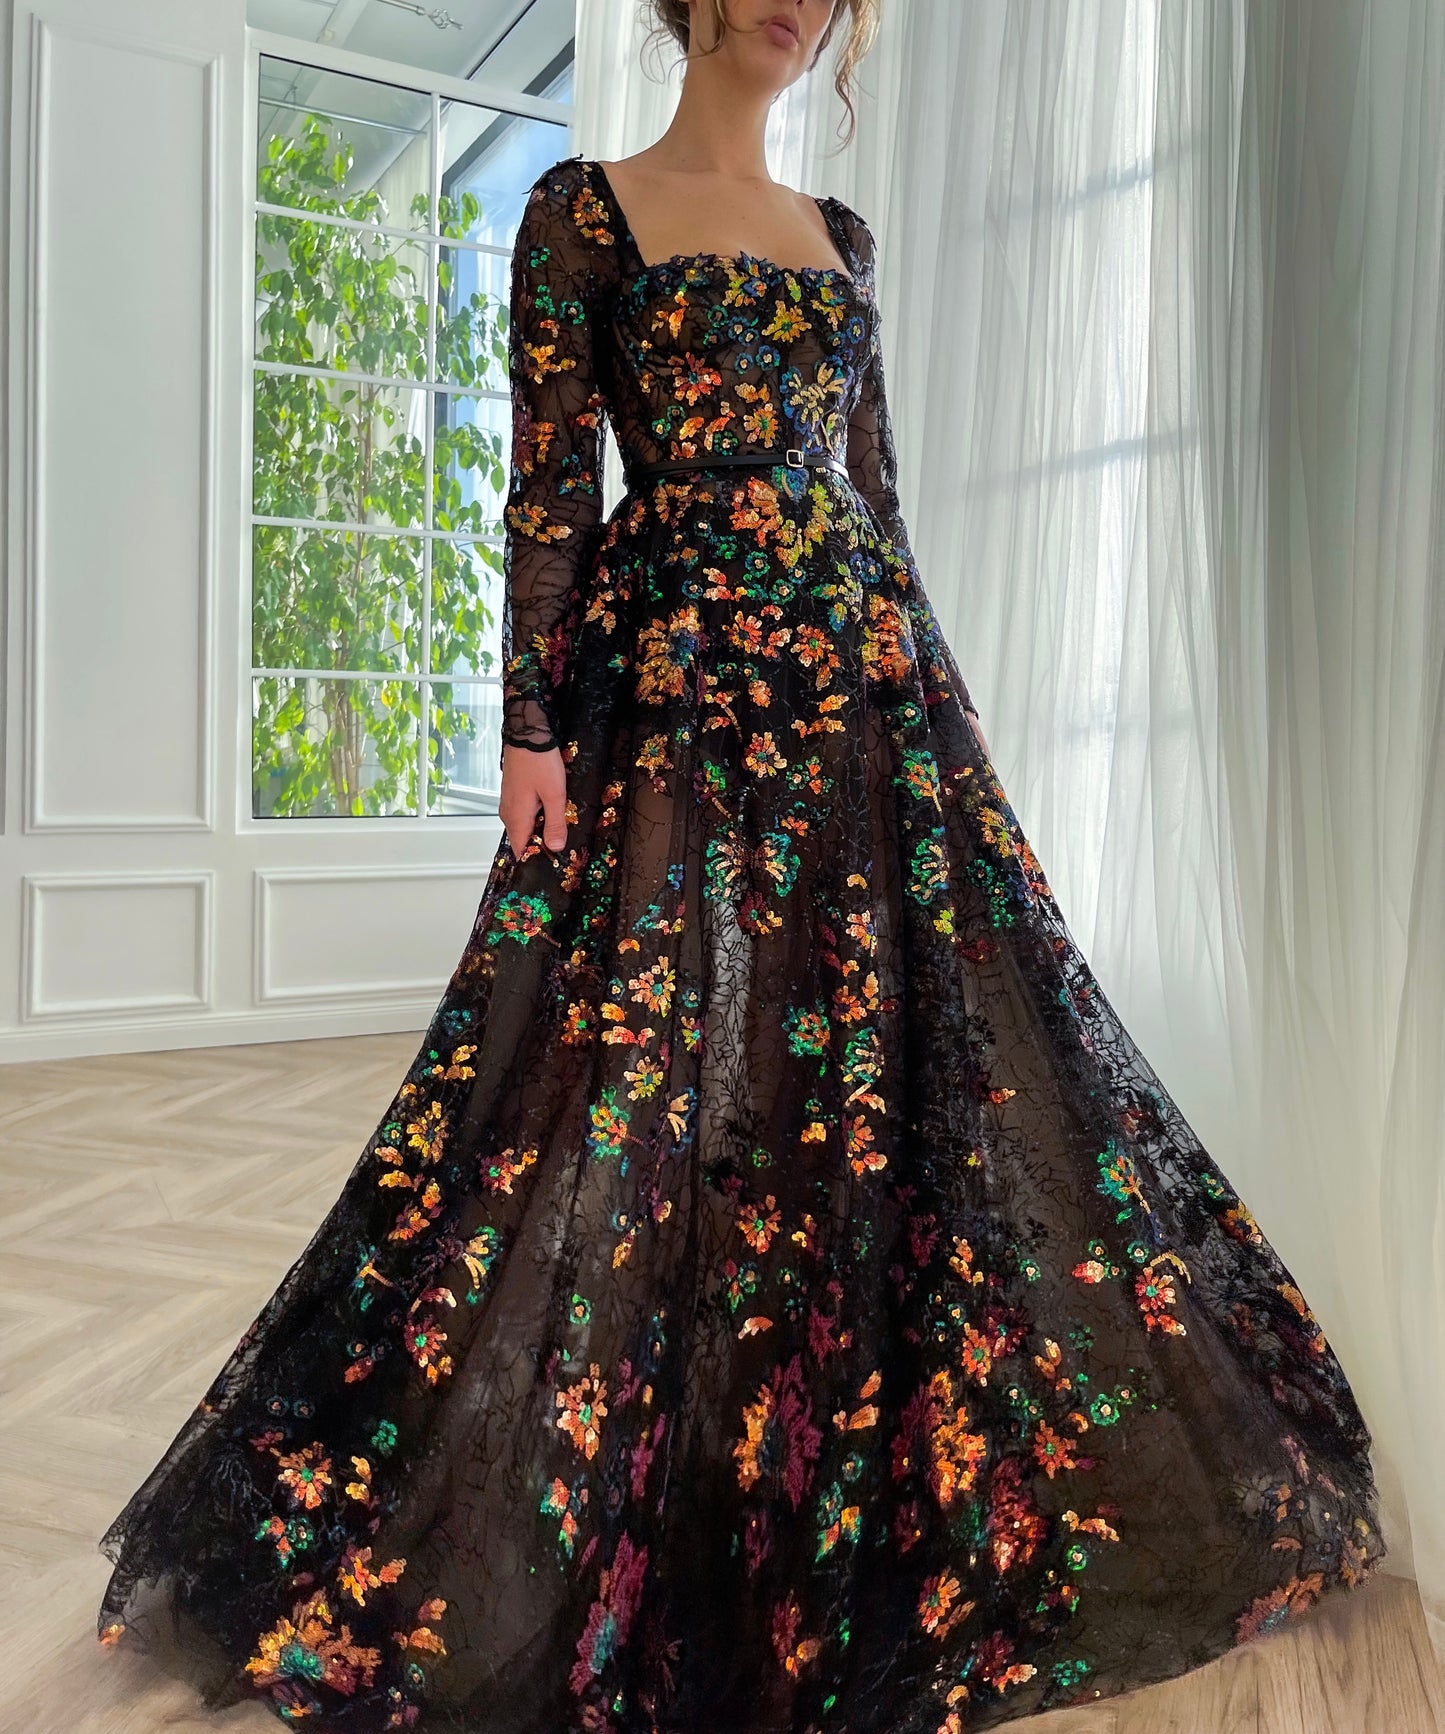 Black A-Line dress with flowers, embroidery, belt and long sleeves